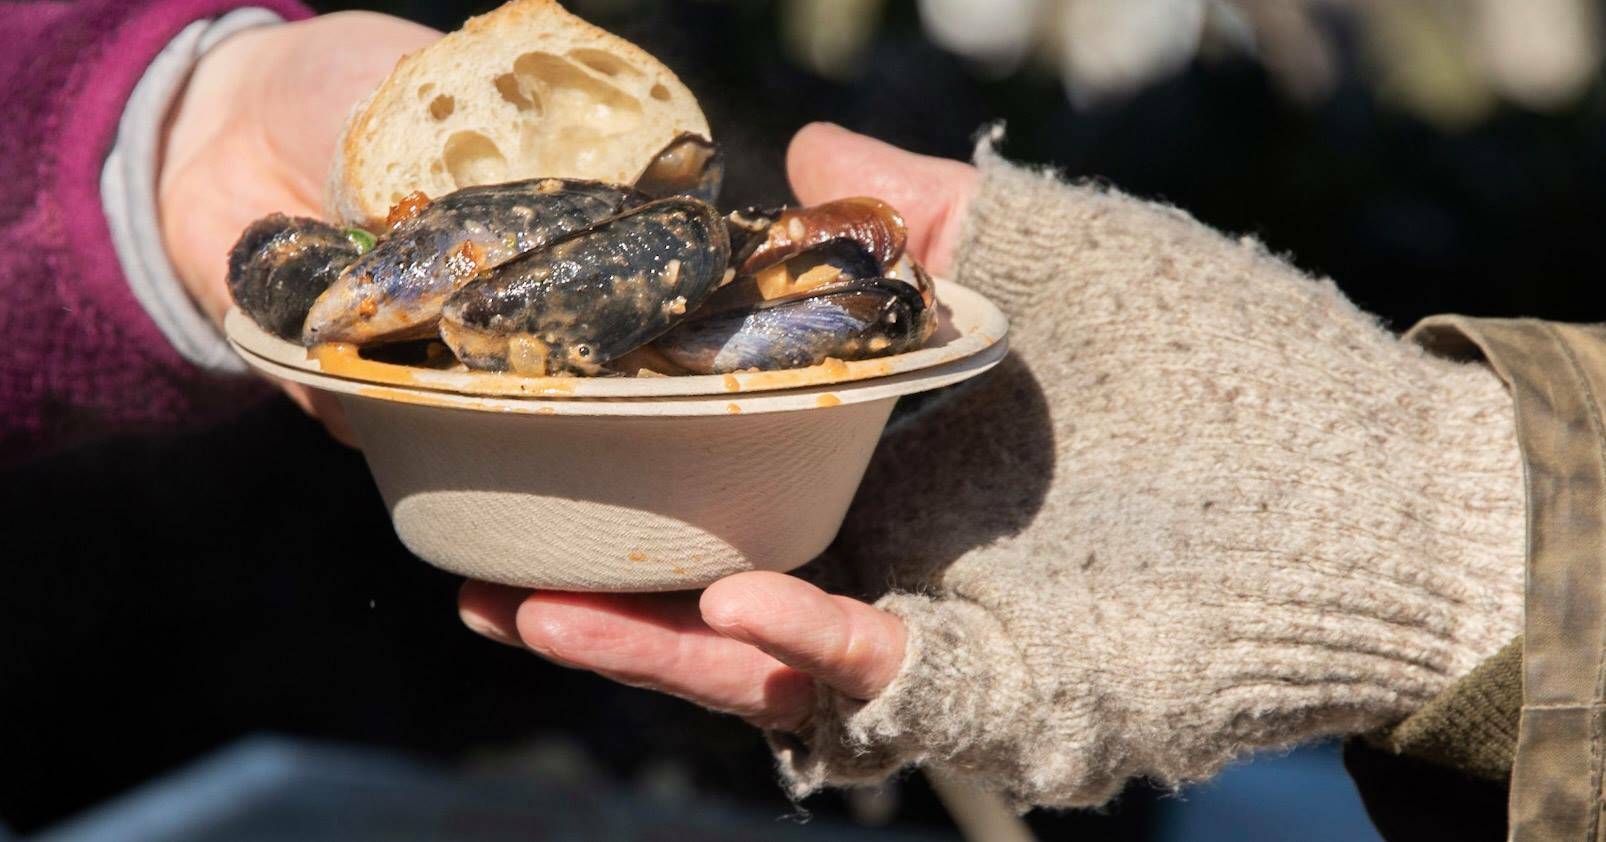 Photo by Jack Penland
The beloved Penn Cove Musselfest is returning, though ticket sales will be drastically reduced.